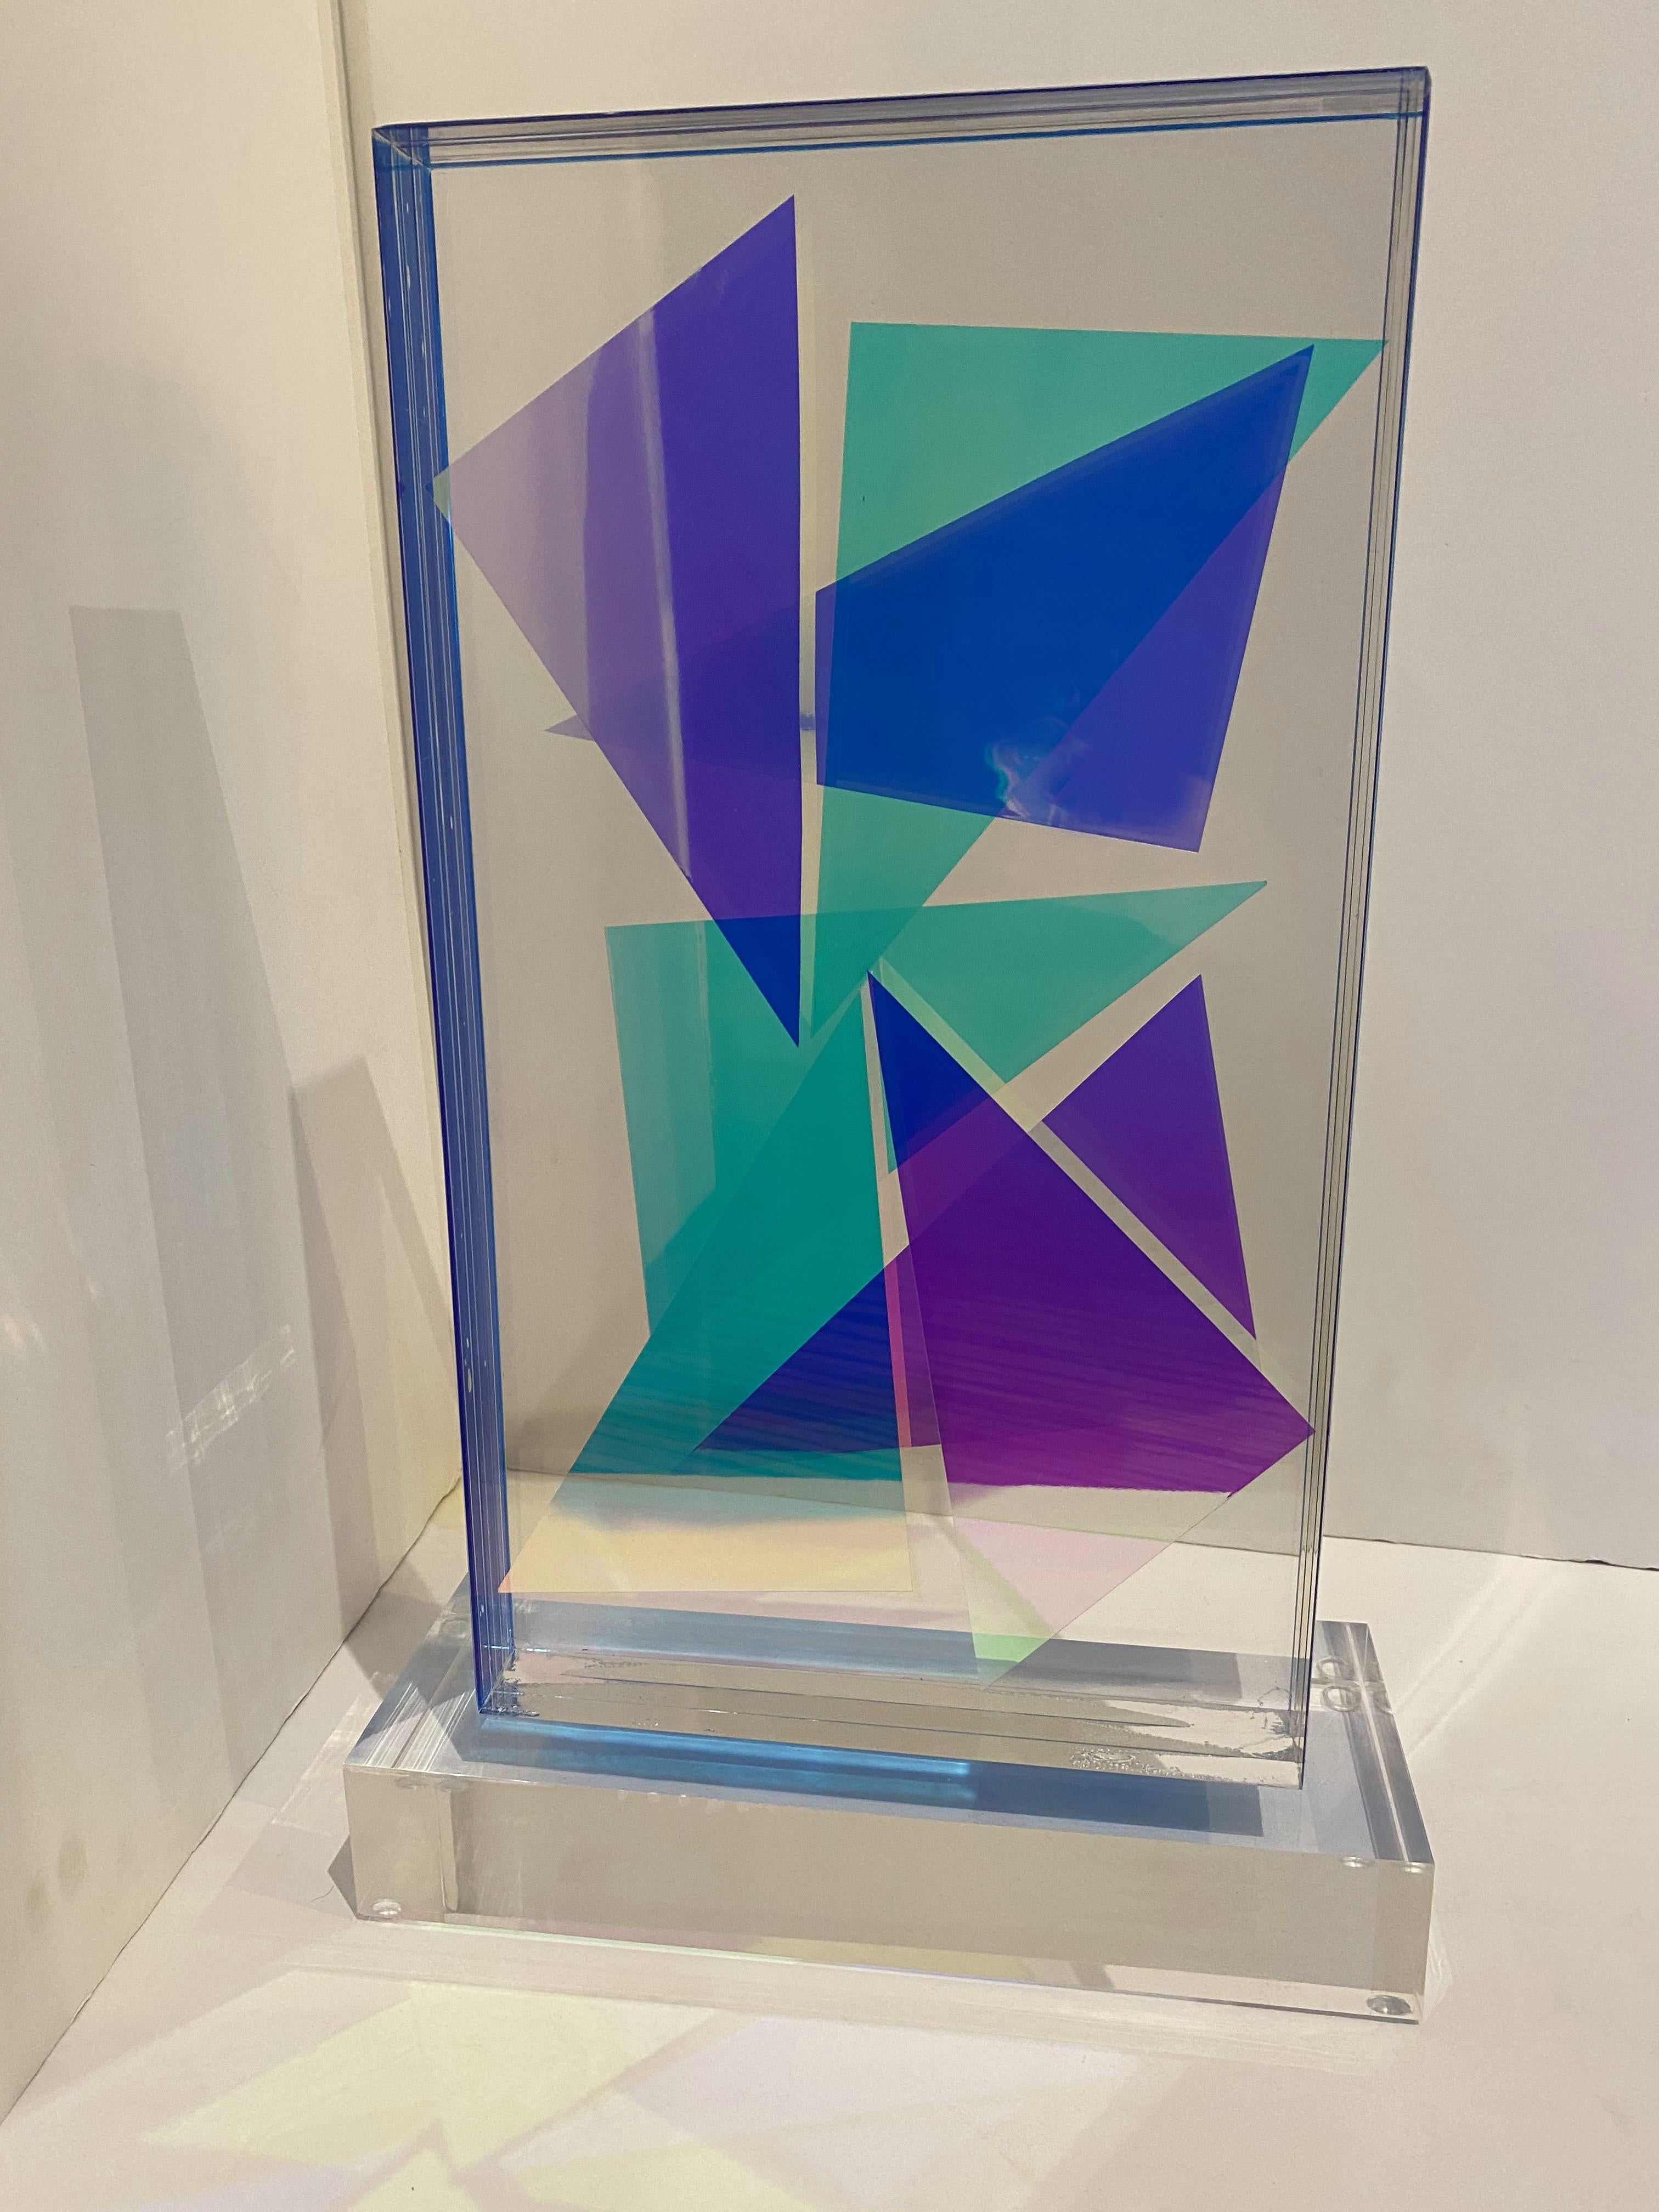 the monolithic lucite block, hand colored on the interiors, with geometric motif, laminated together, on a base. Signed by the artist. Selected Solo Exhibitions

Selected Exhibitions of the artist

NY Art Gallery, Santa Cruz de Tenerife, Spain